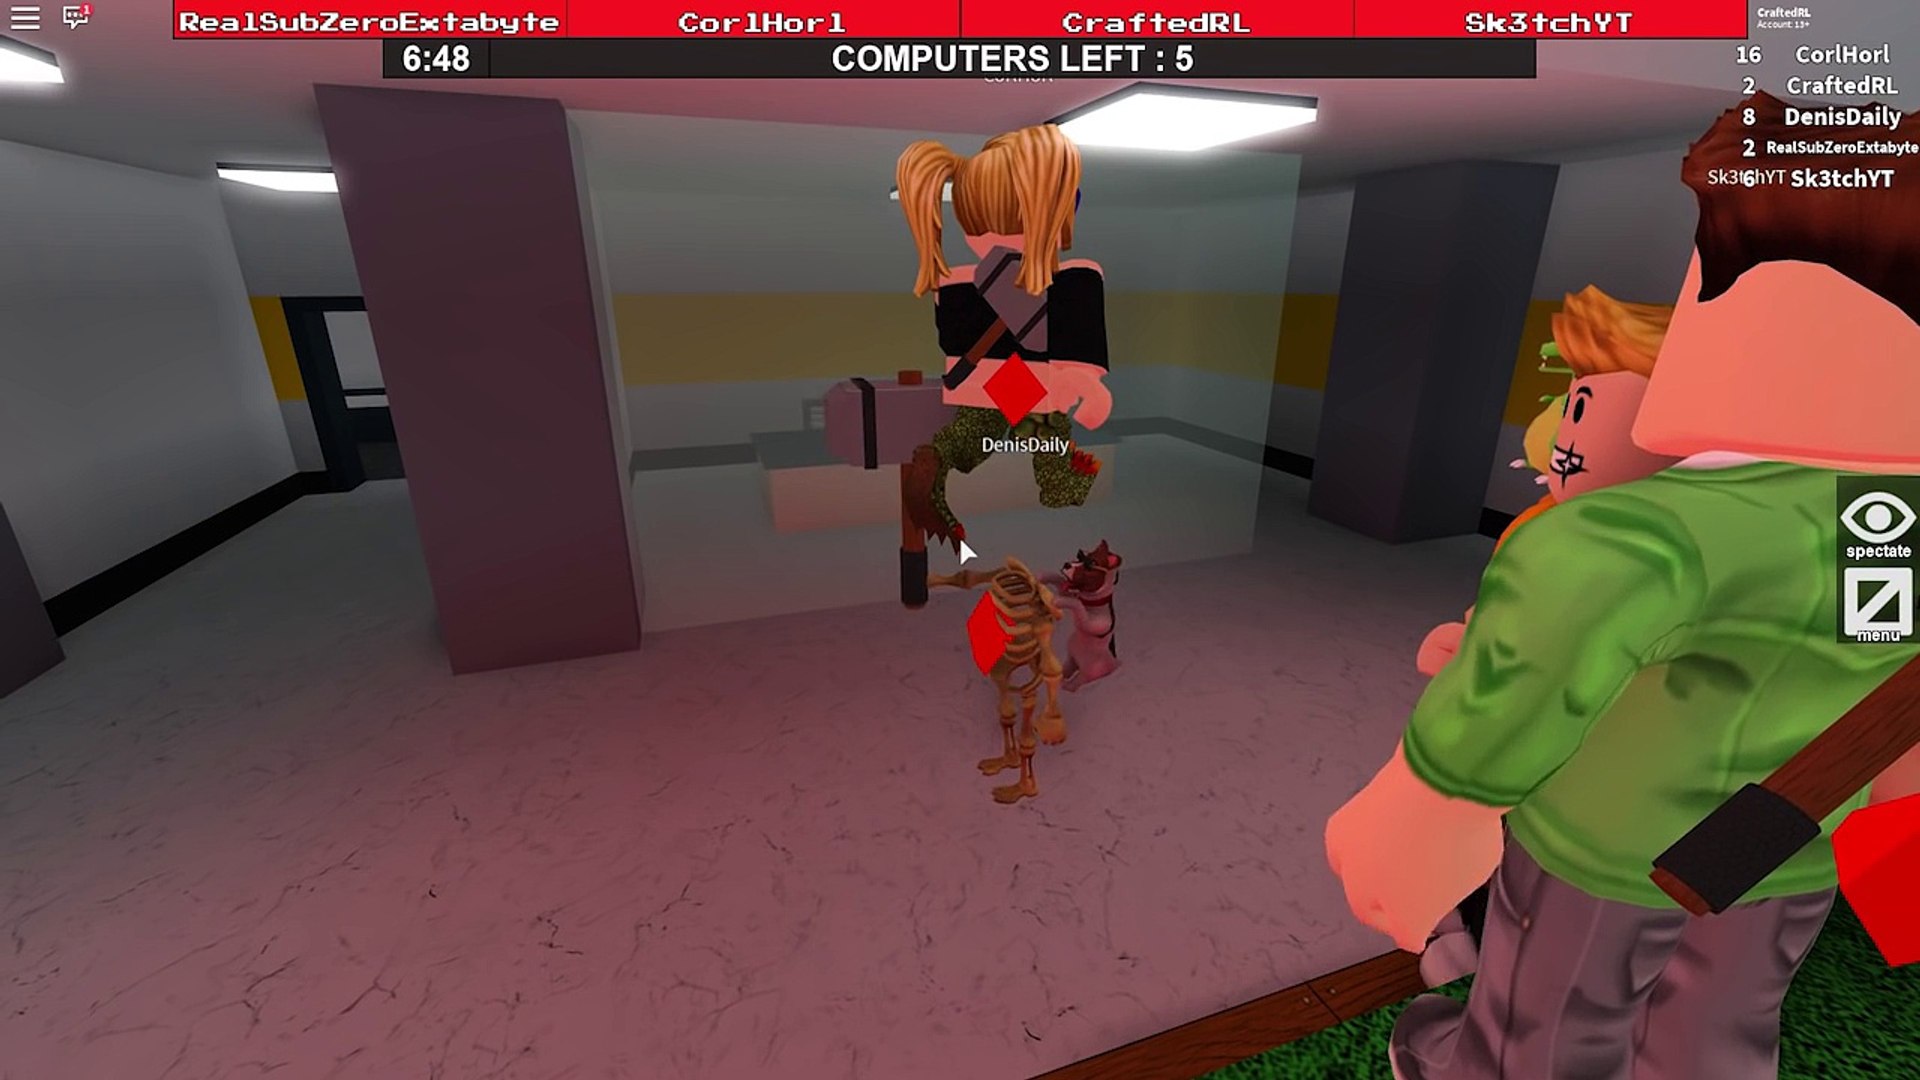 DON'T LET HIM FIND YOU in Roblox Flee the Facility! on Vimeo